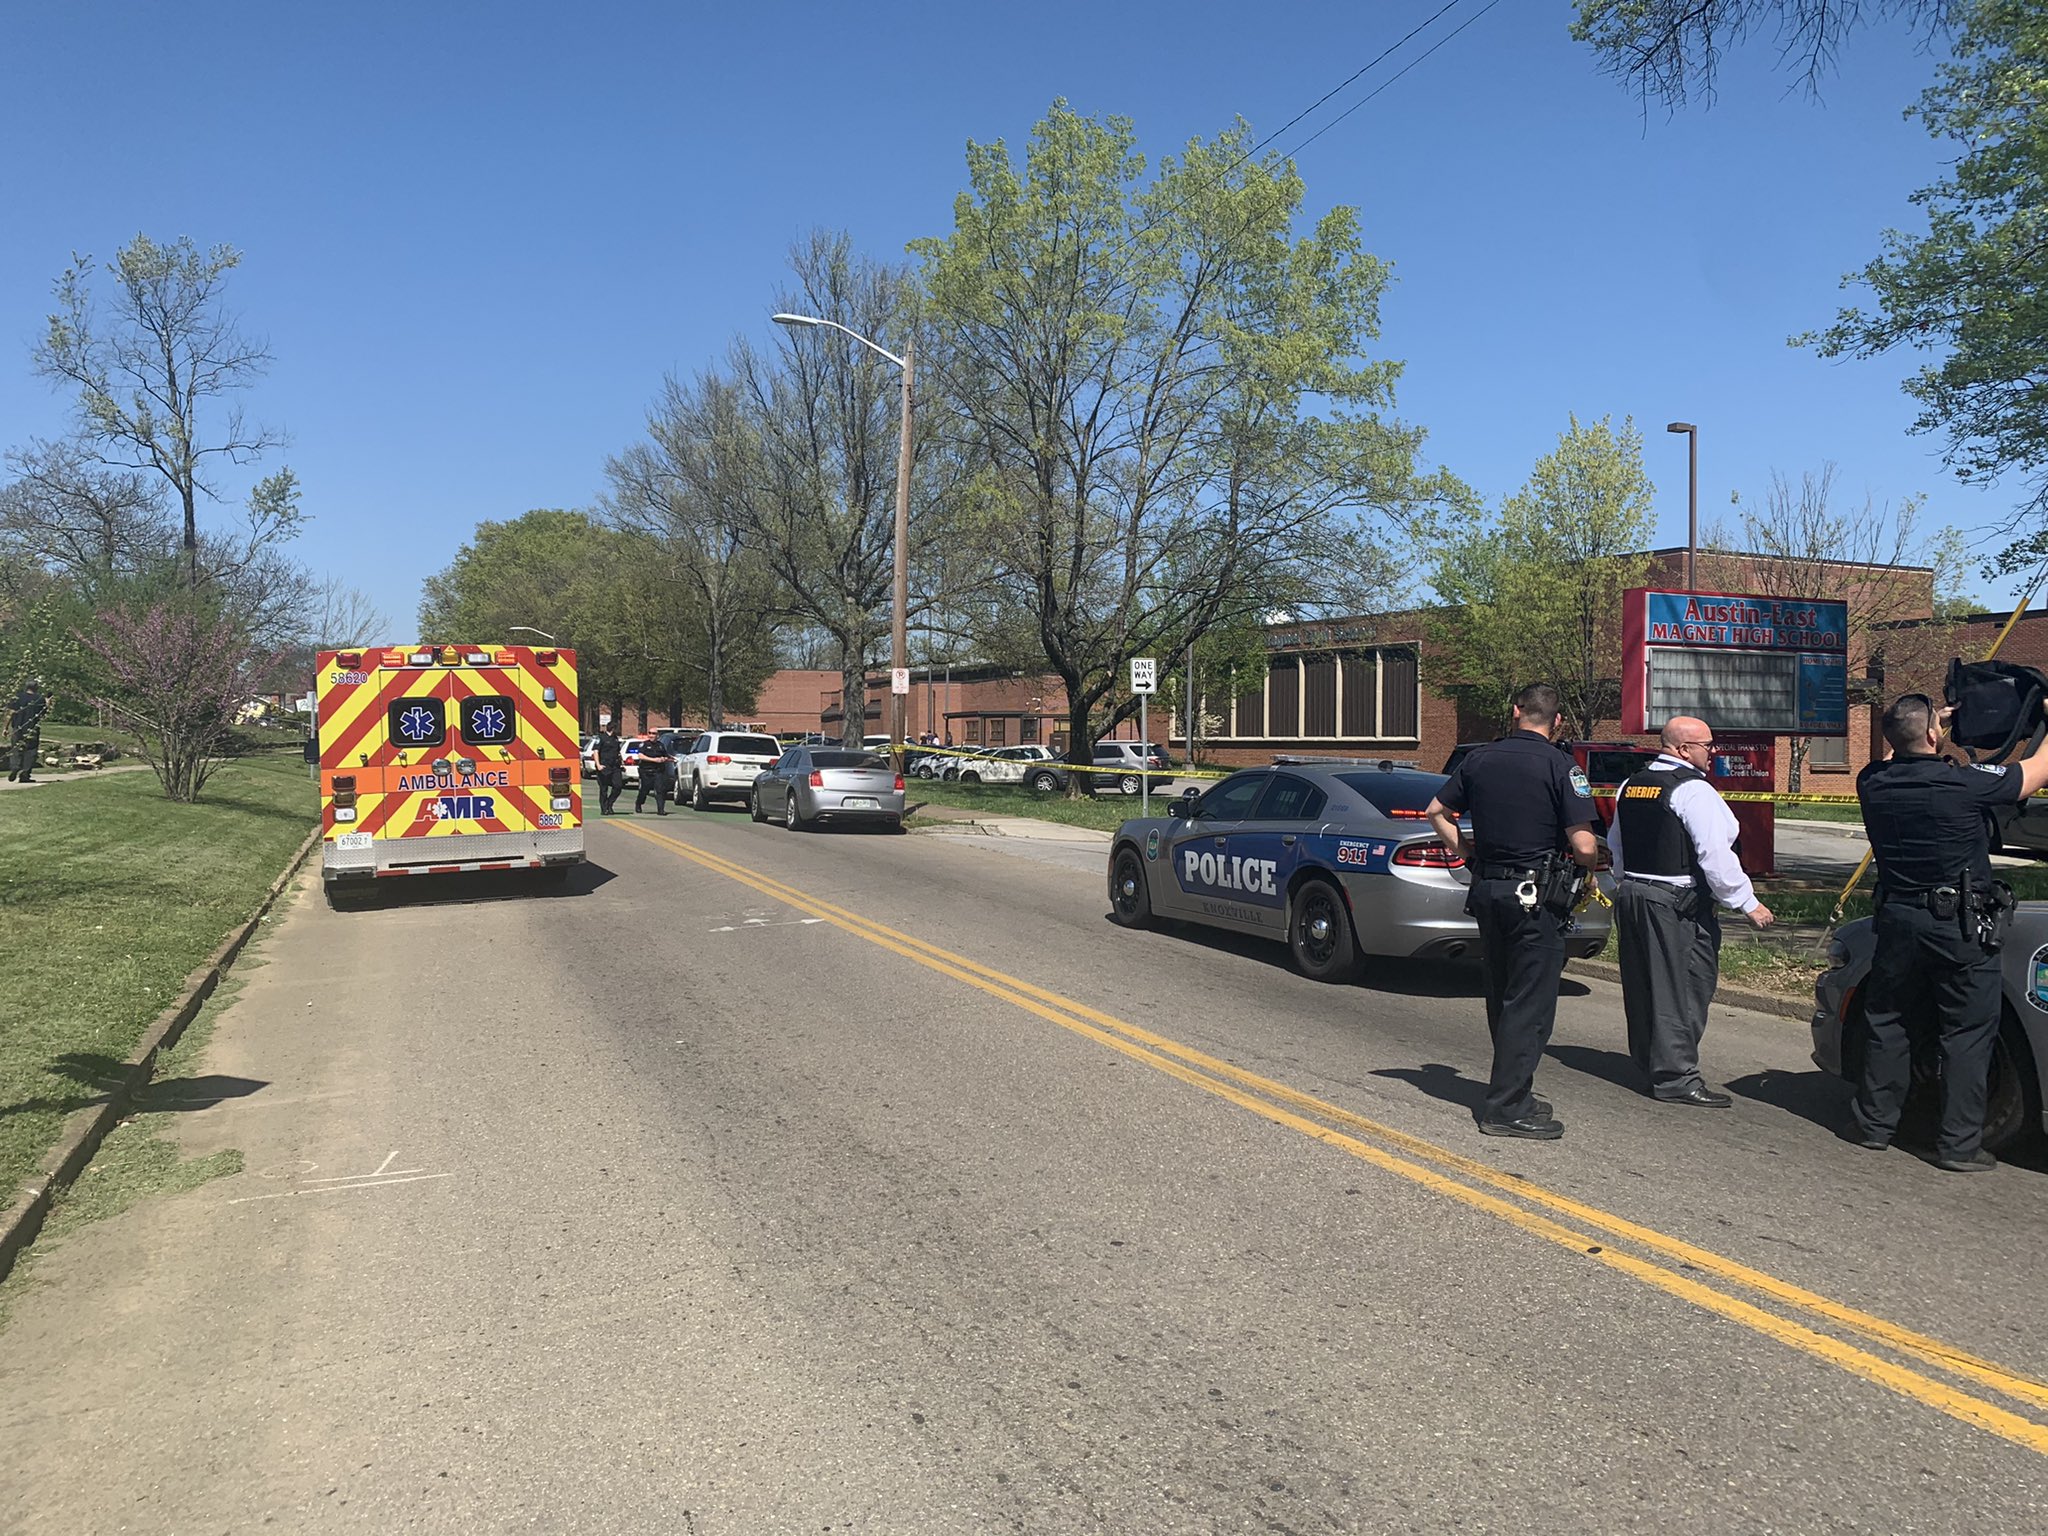 BREAKING: Police report multiple victims, including police officer, in Knoxville, TN high school shooting